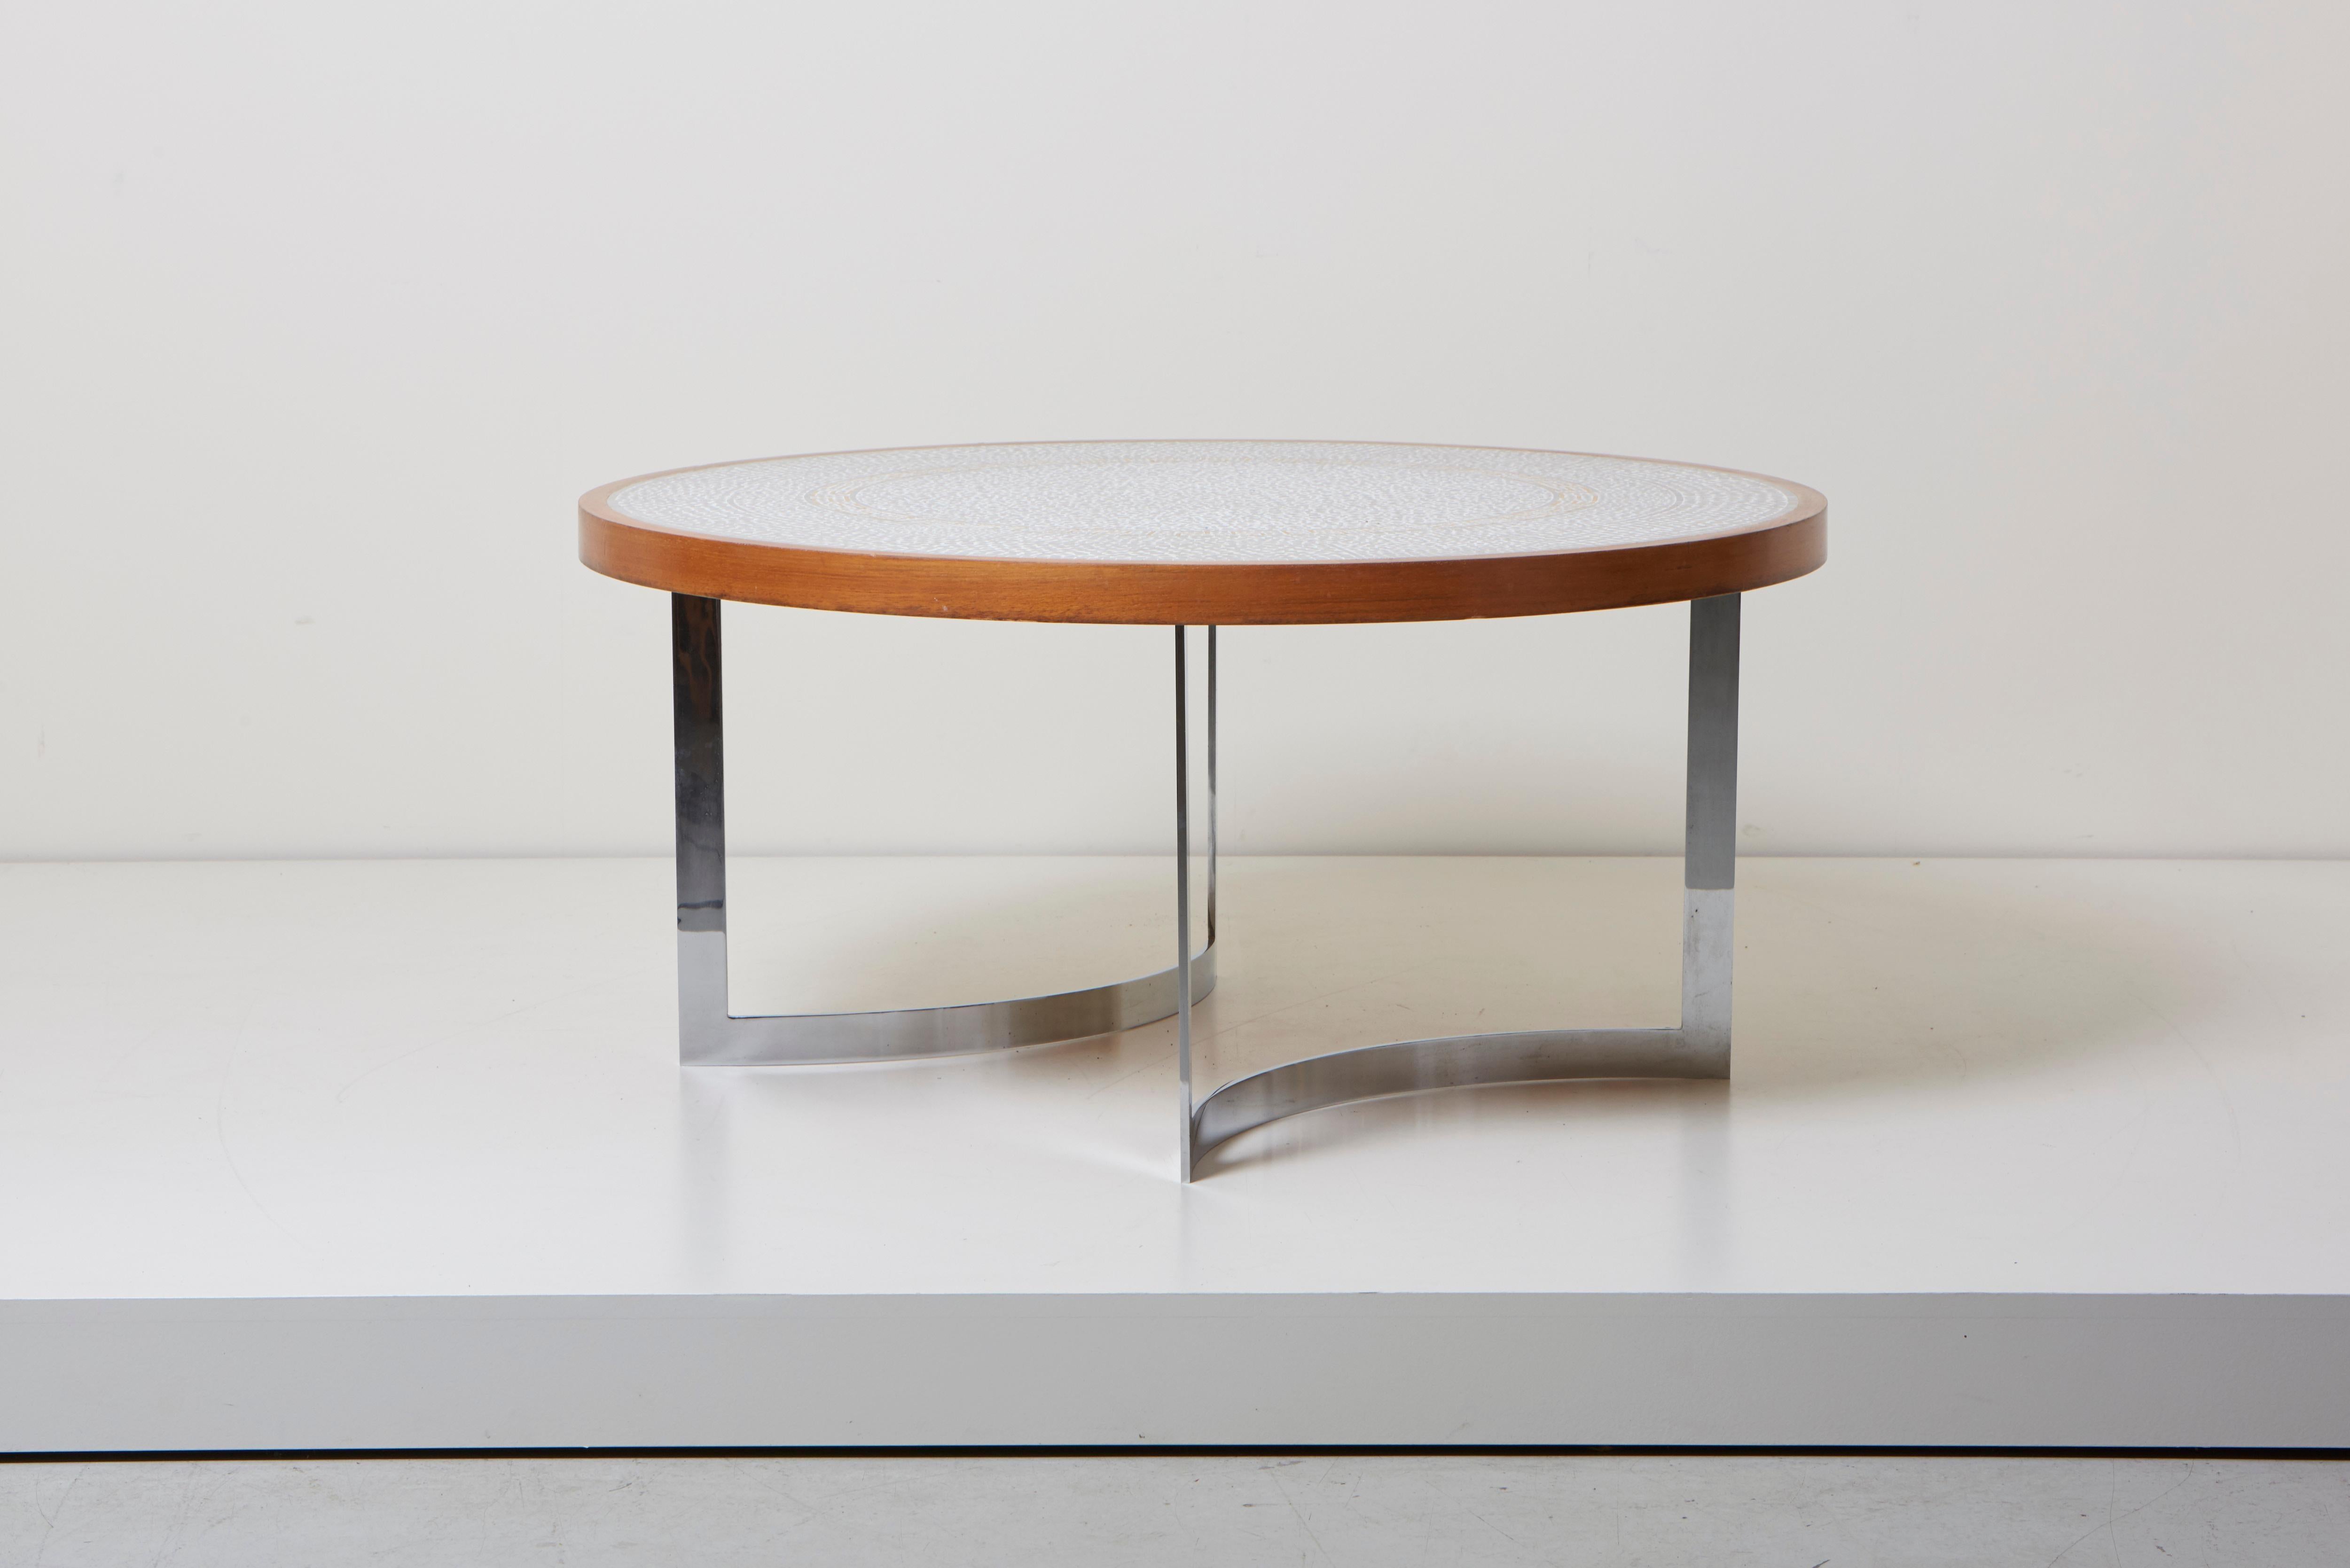 Huge round coffee table designed by the German designer Berthold Müller, Germany, 1967.
The table has chrome legs and a walnut frame. The top has white ceramic stones combined with round pattern.
A great eyecatcher for a modern, antique, midcentury